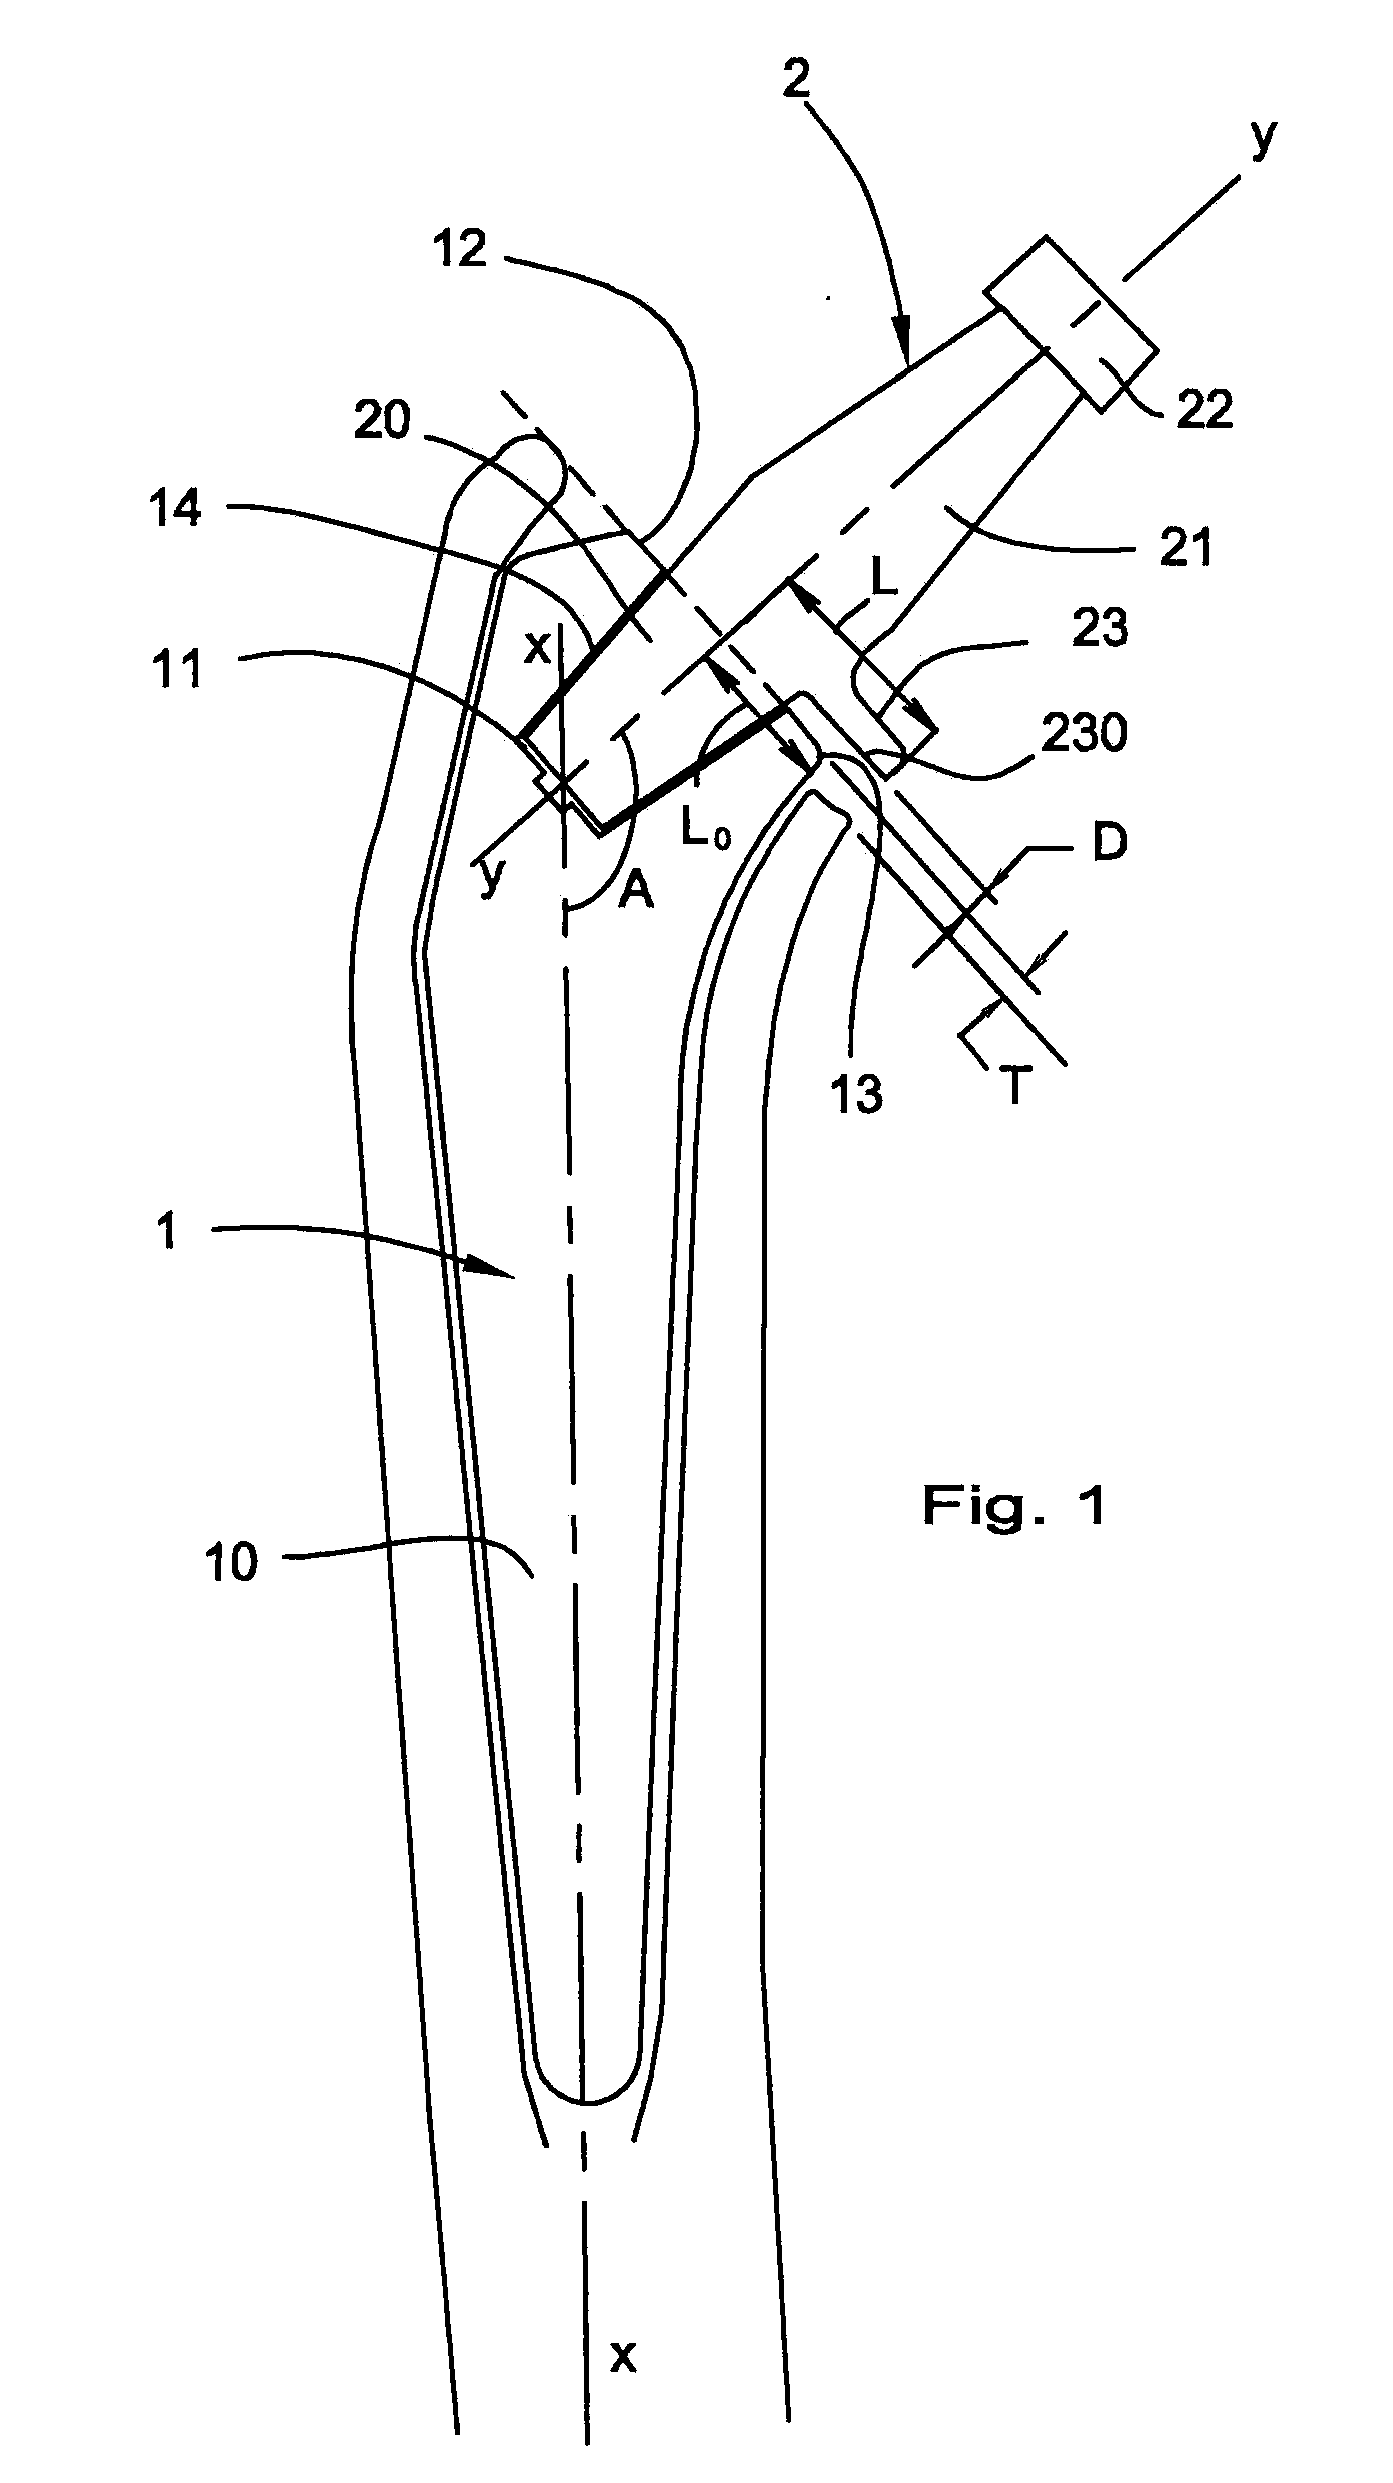 Elements of a femoral prosthesis with a modular neck, tooling for implanting a femoral prosthesis and method of implantation